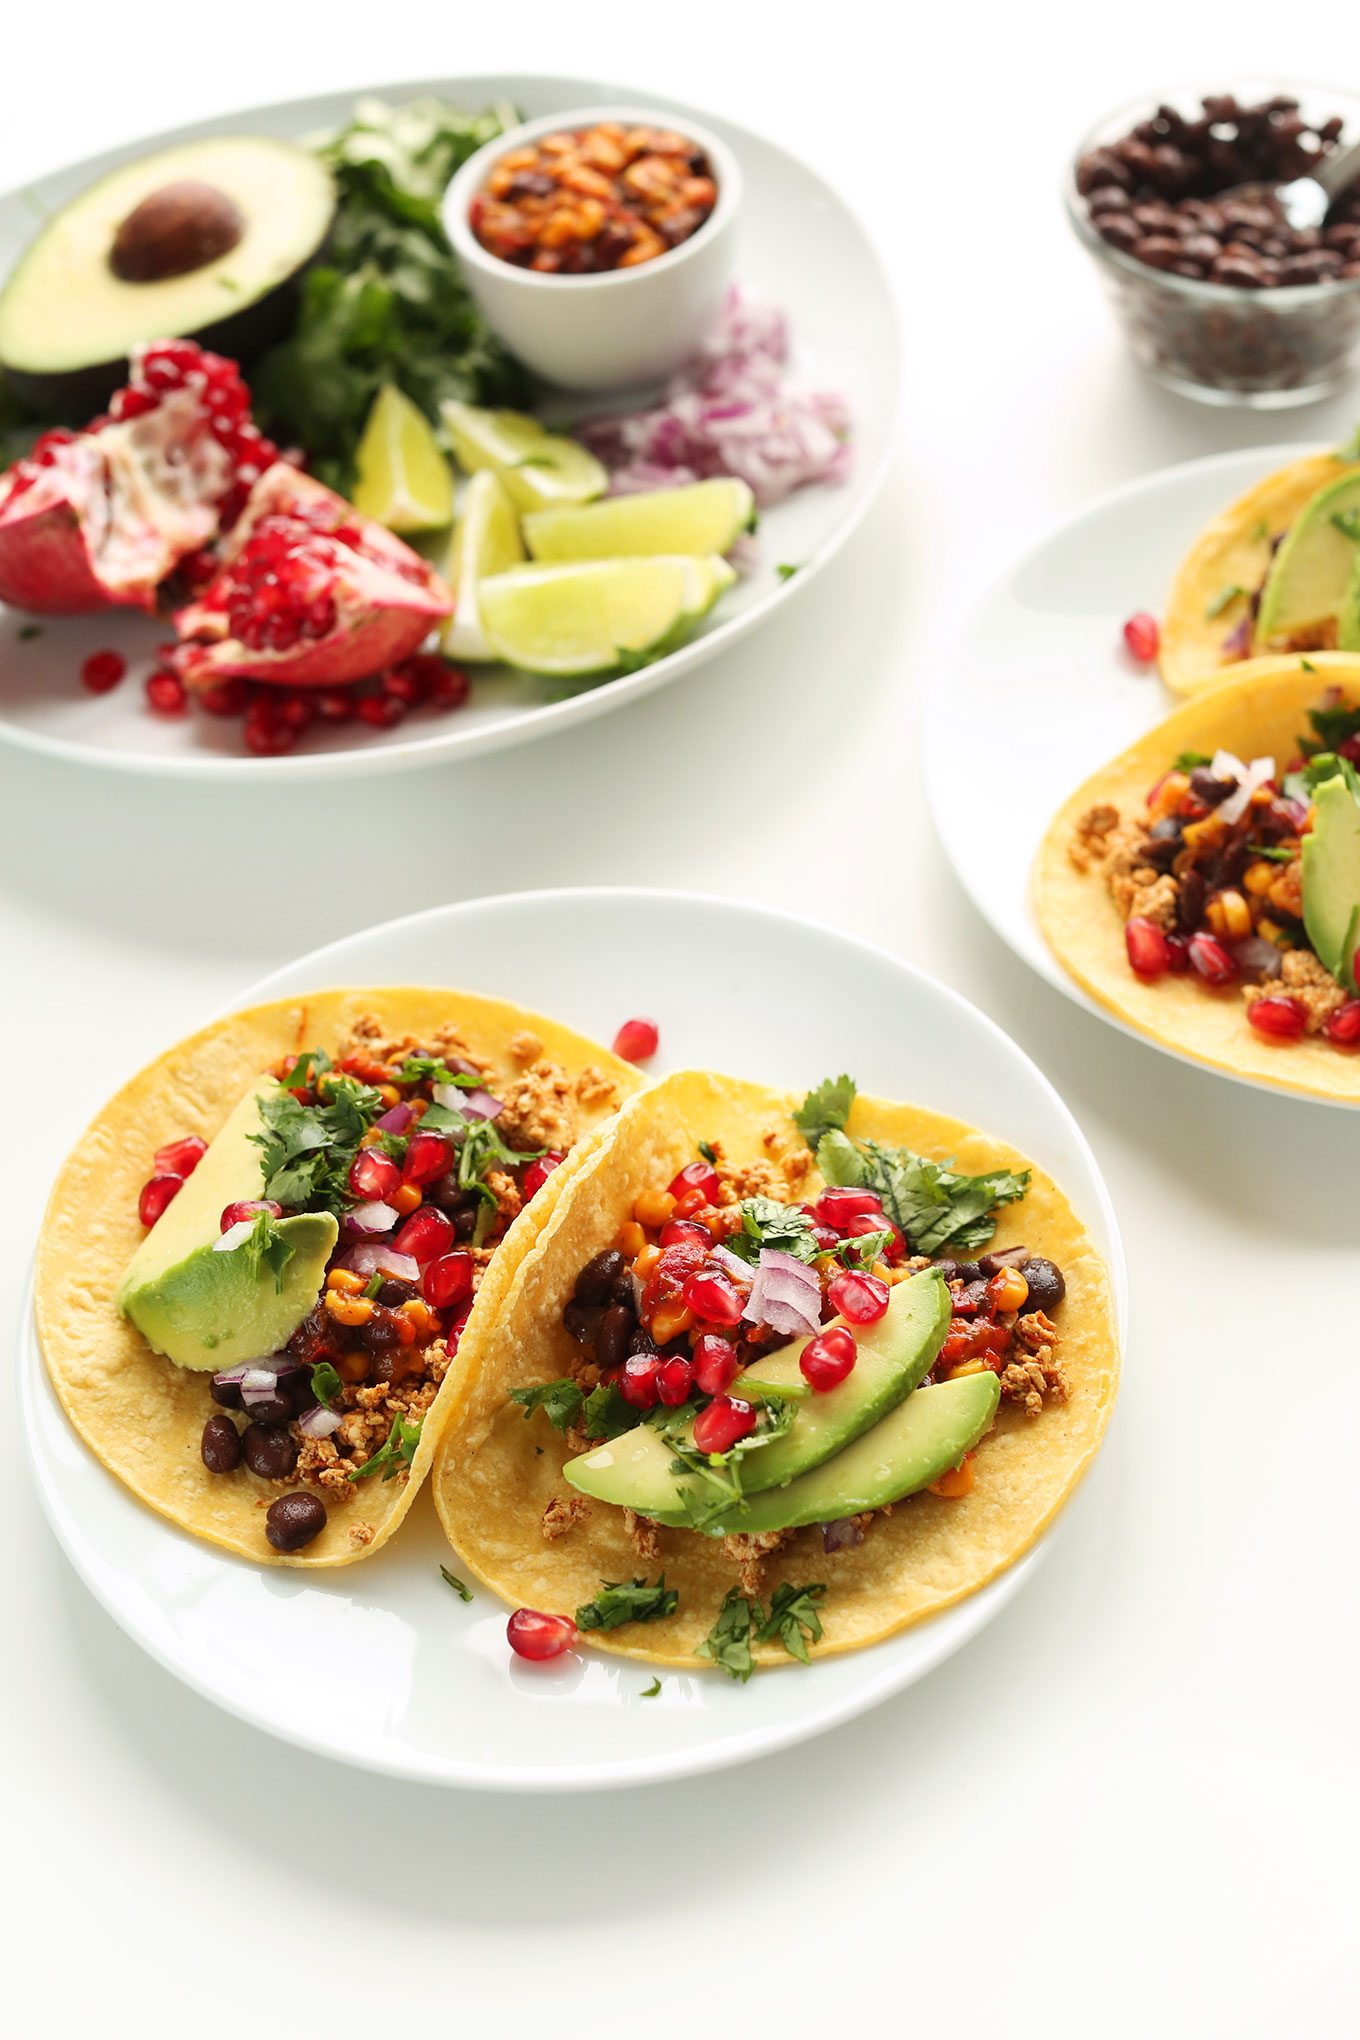 Plates of easy vegan breakfast tacos made with fresh fruit and veggies